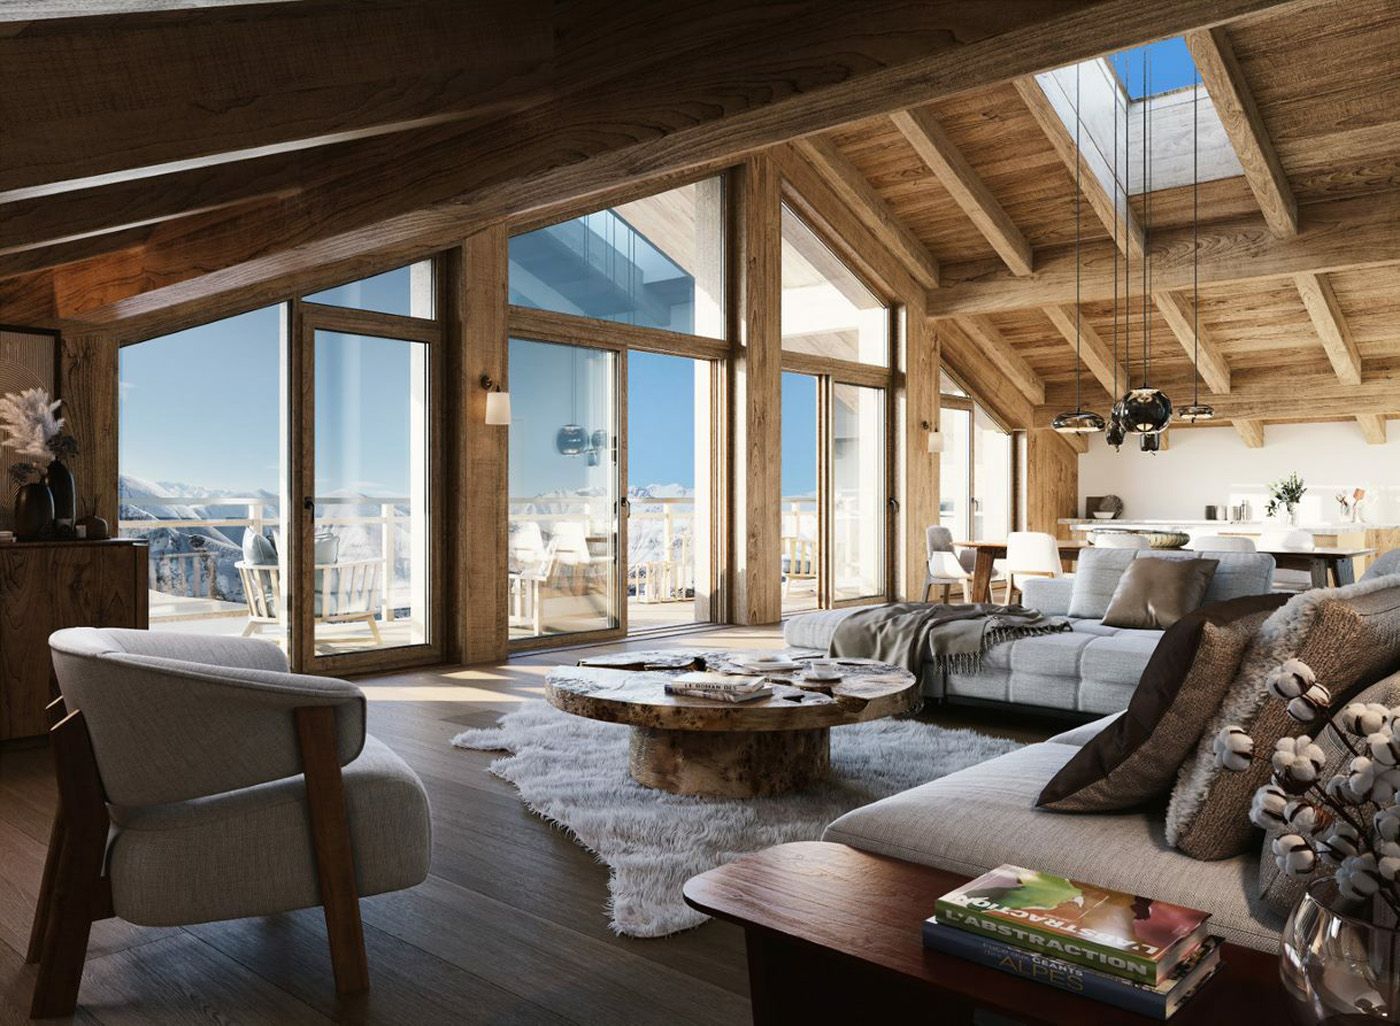 4 bed Apartment For Sale in Alpe d'Huez Grand Domaine, French Alps